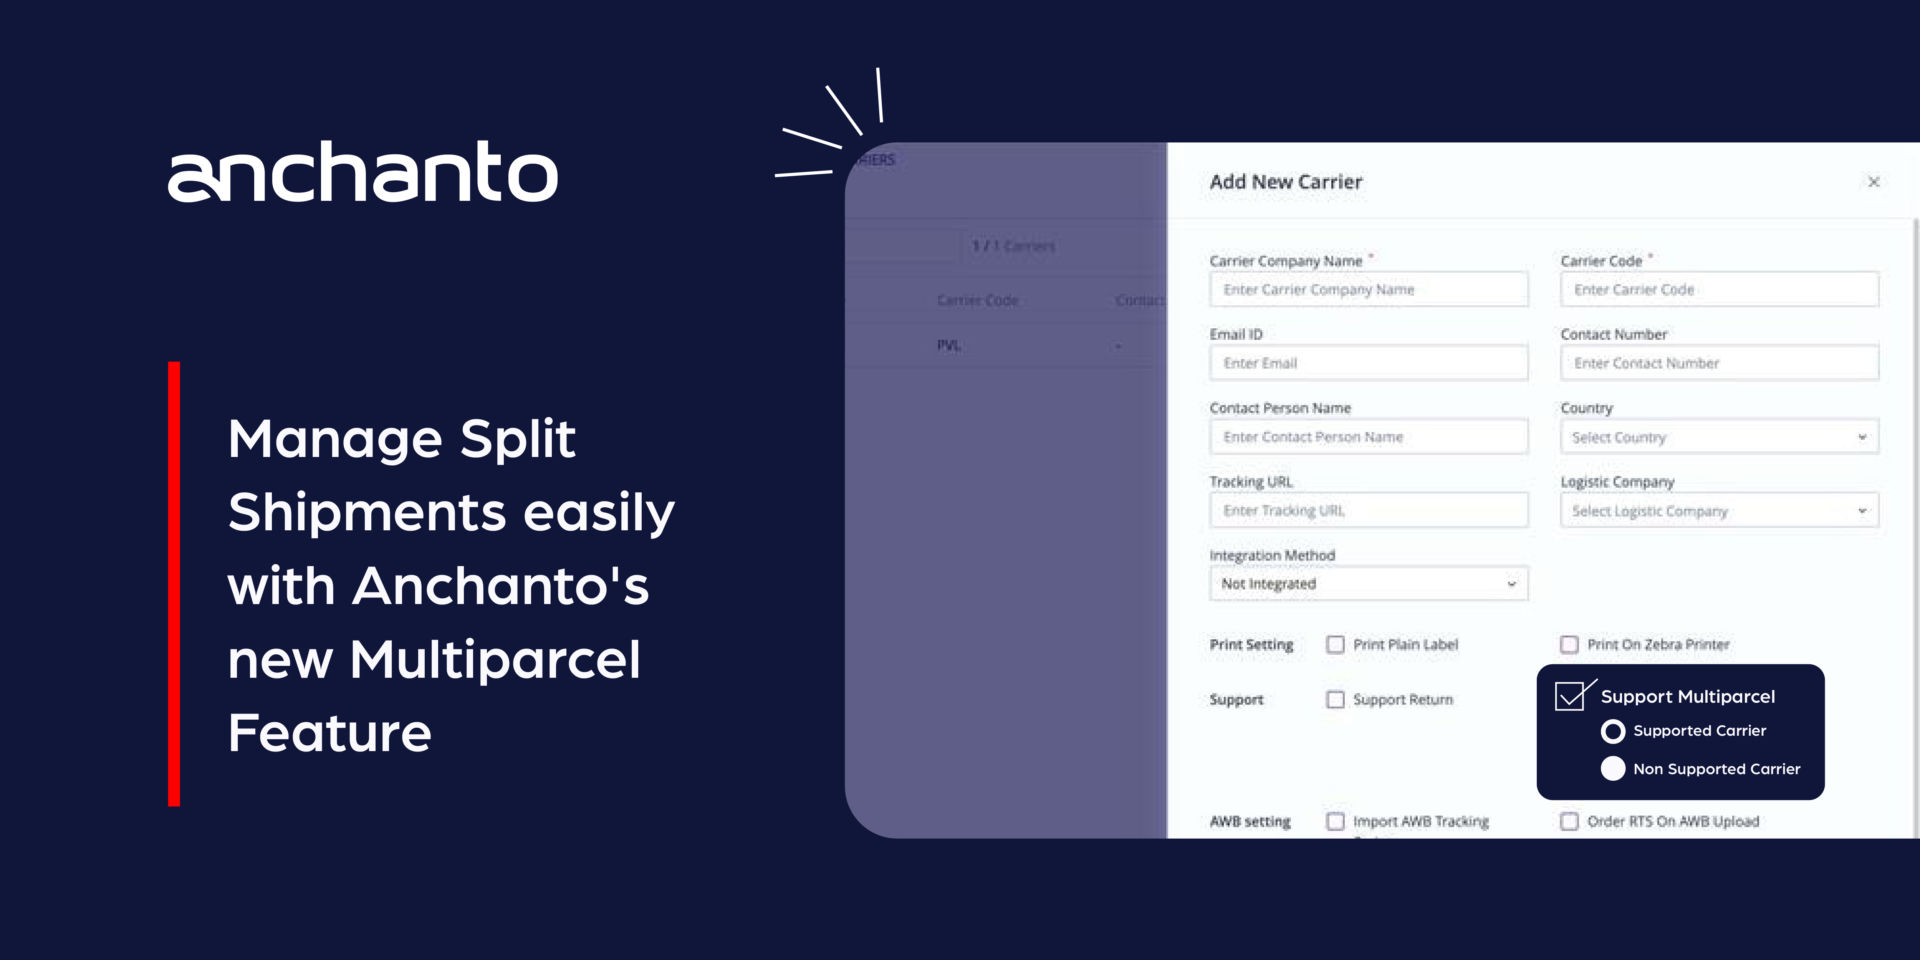 Manage Split Shipments Easily with Anchanto’s New Multiparcel Feature